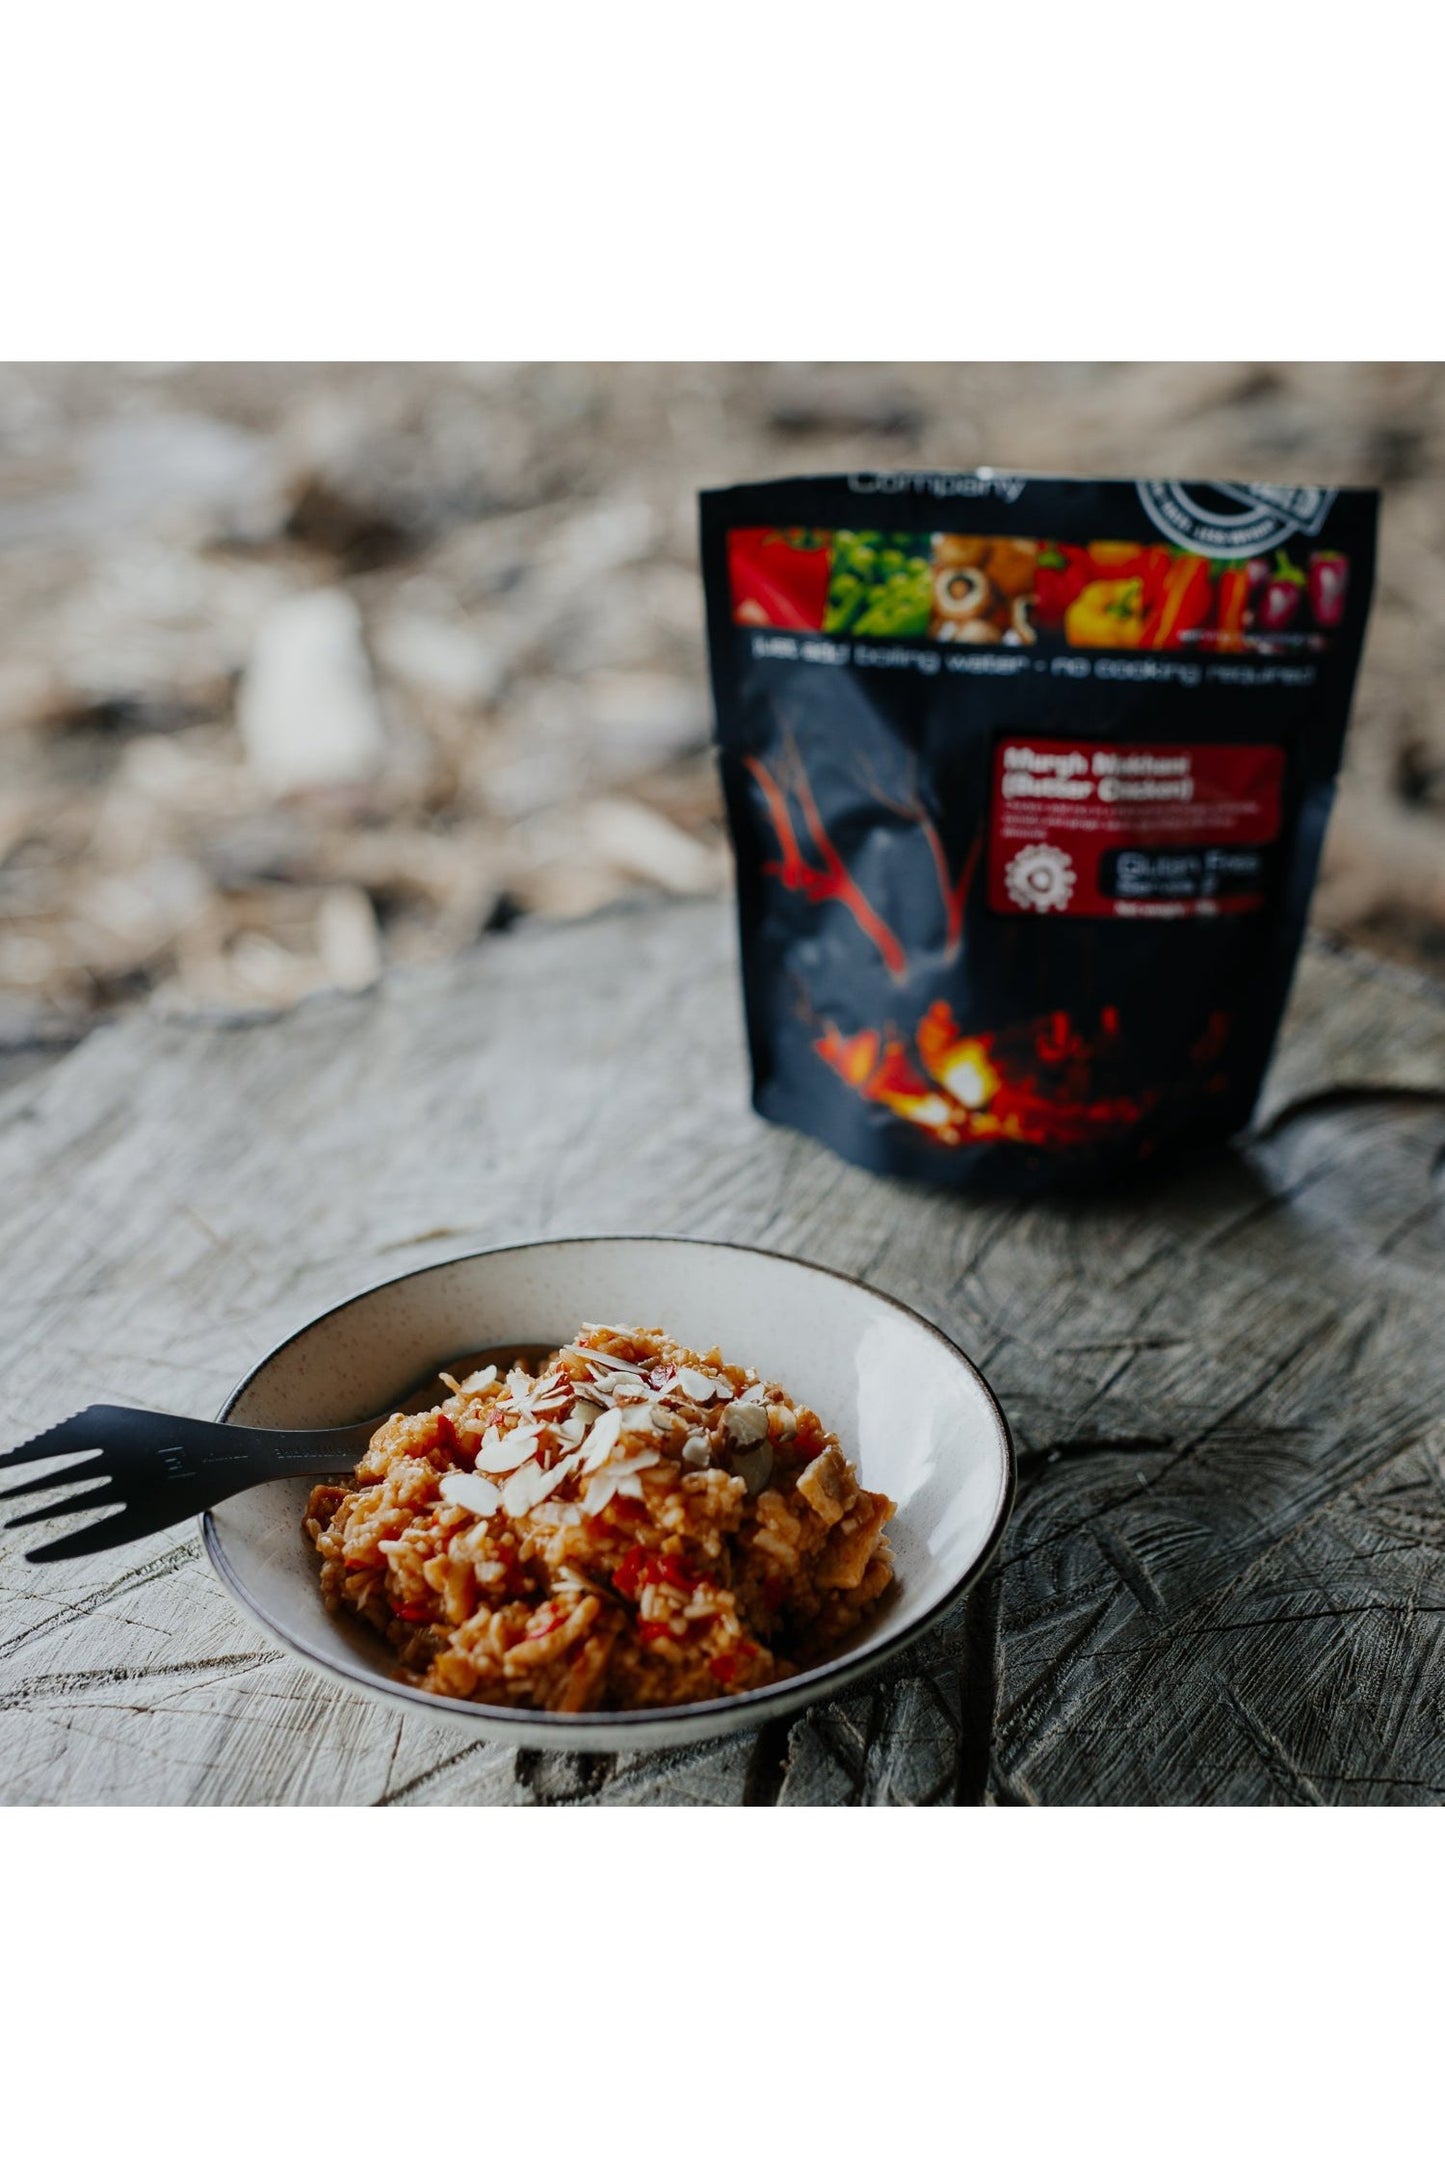 The Outdoor Gourmet Company - Butter Chicken The Outdoor Gourmet Company Rugged Ram Outdoors